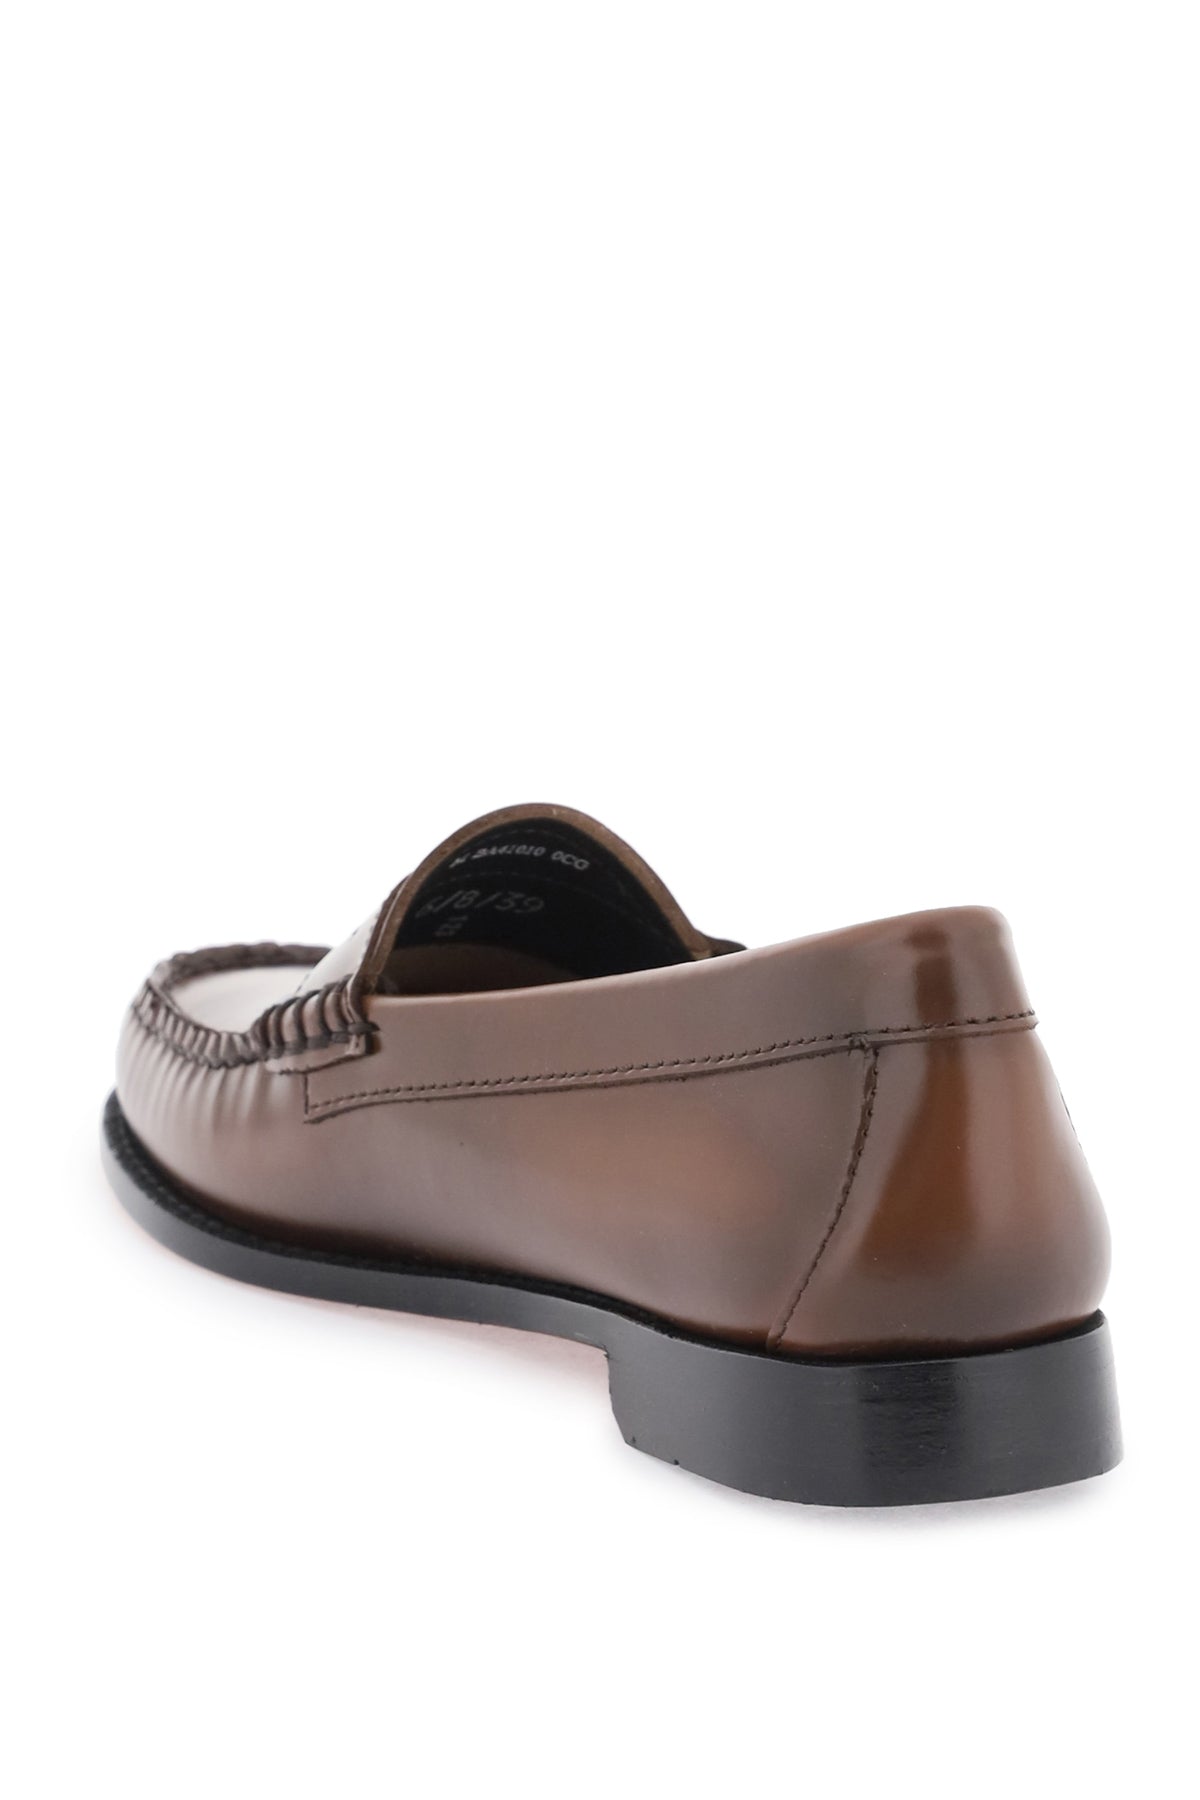 G.h. bass 'weejuns' penny loafers-1